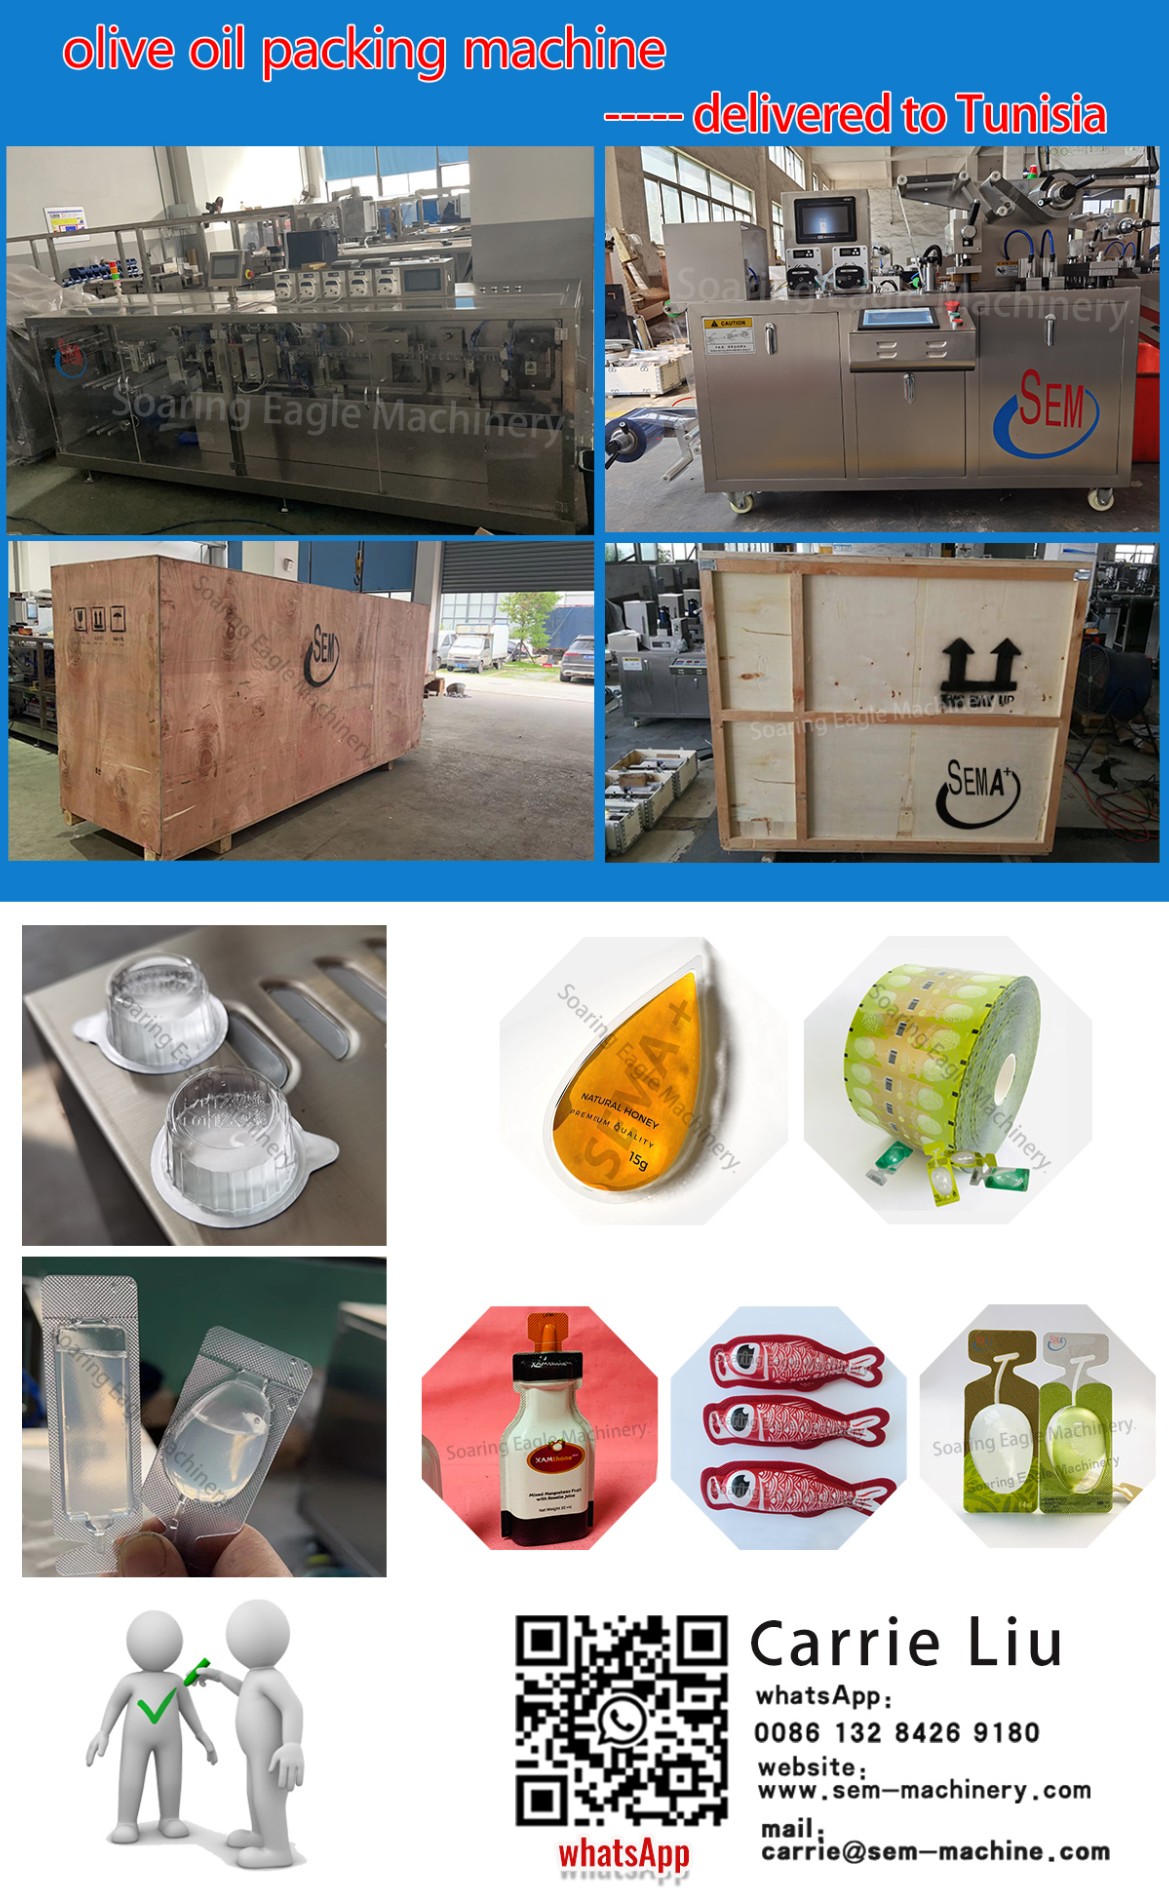 Olive oil packing machine——deliver to Tunisia